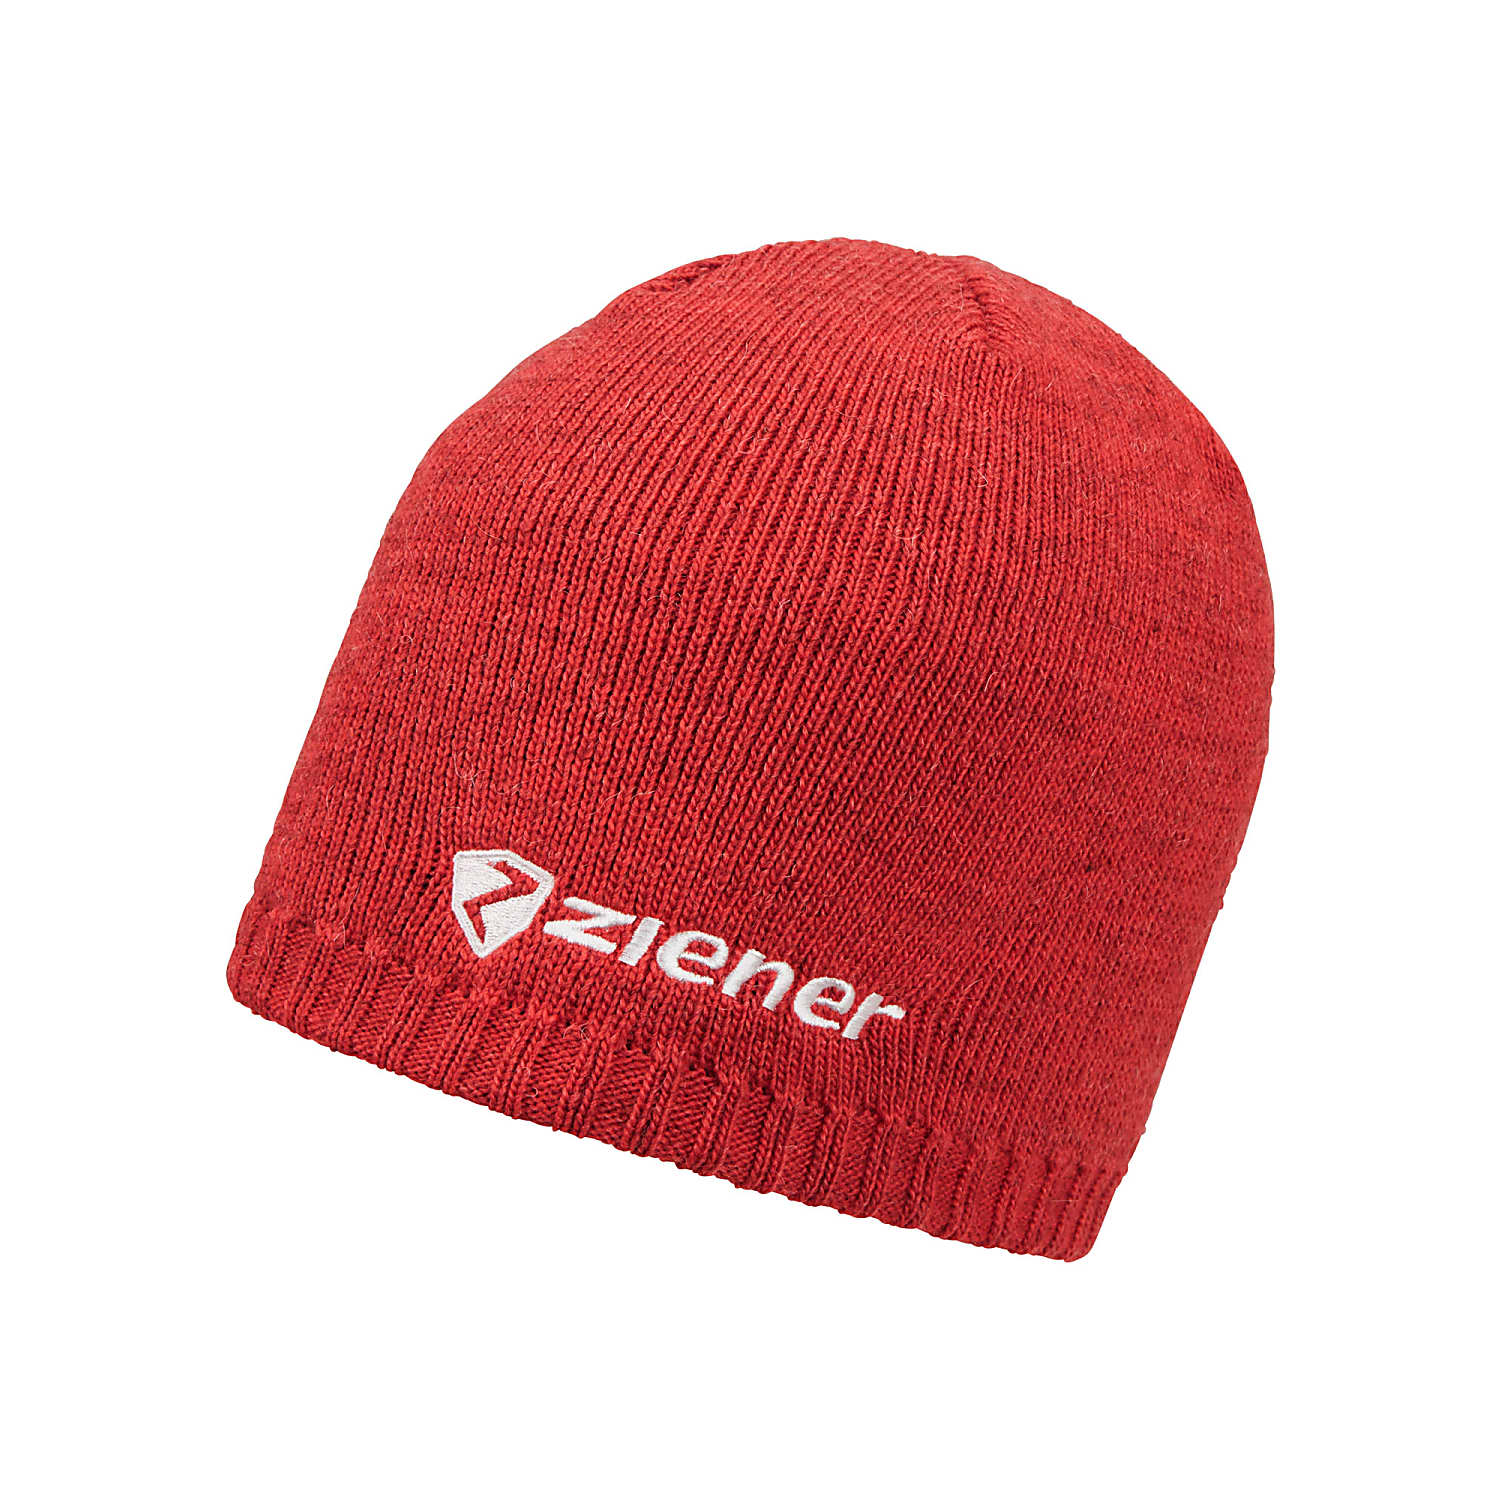 Ziener and HAT, cheap Red - Fast IRUNO shipping